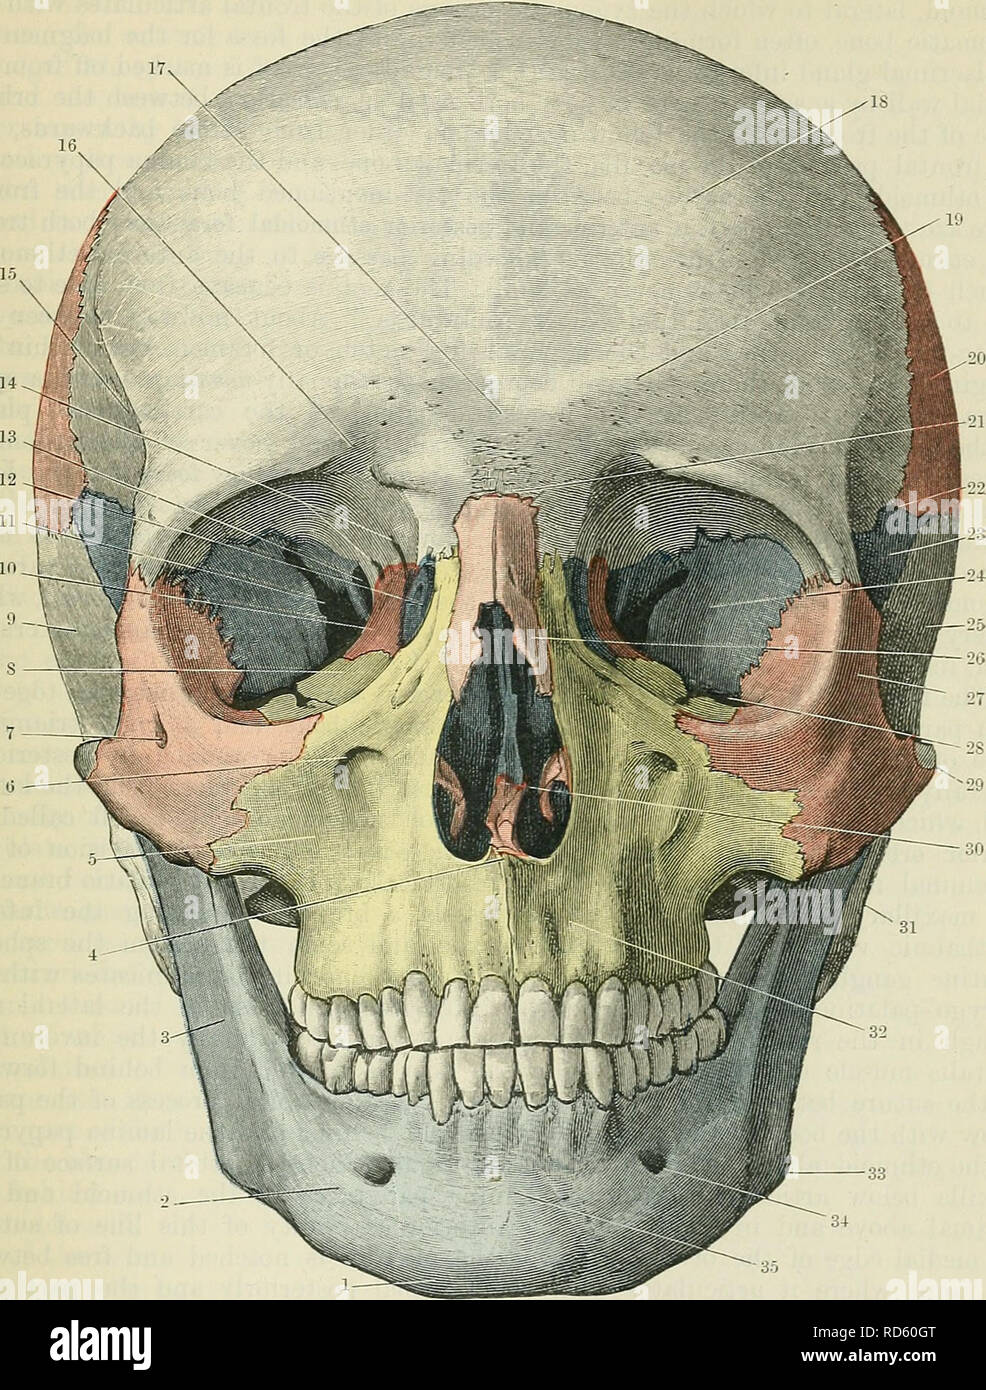 Cunningham S Text Book Of Anatomy Anatomy The Fkont Of The Skull